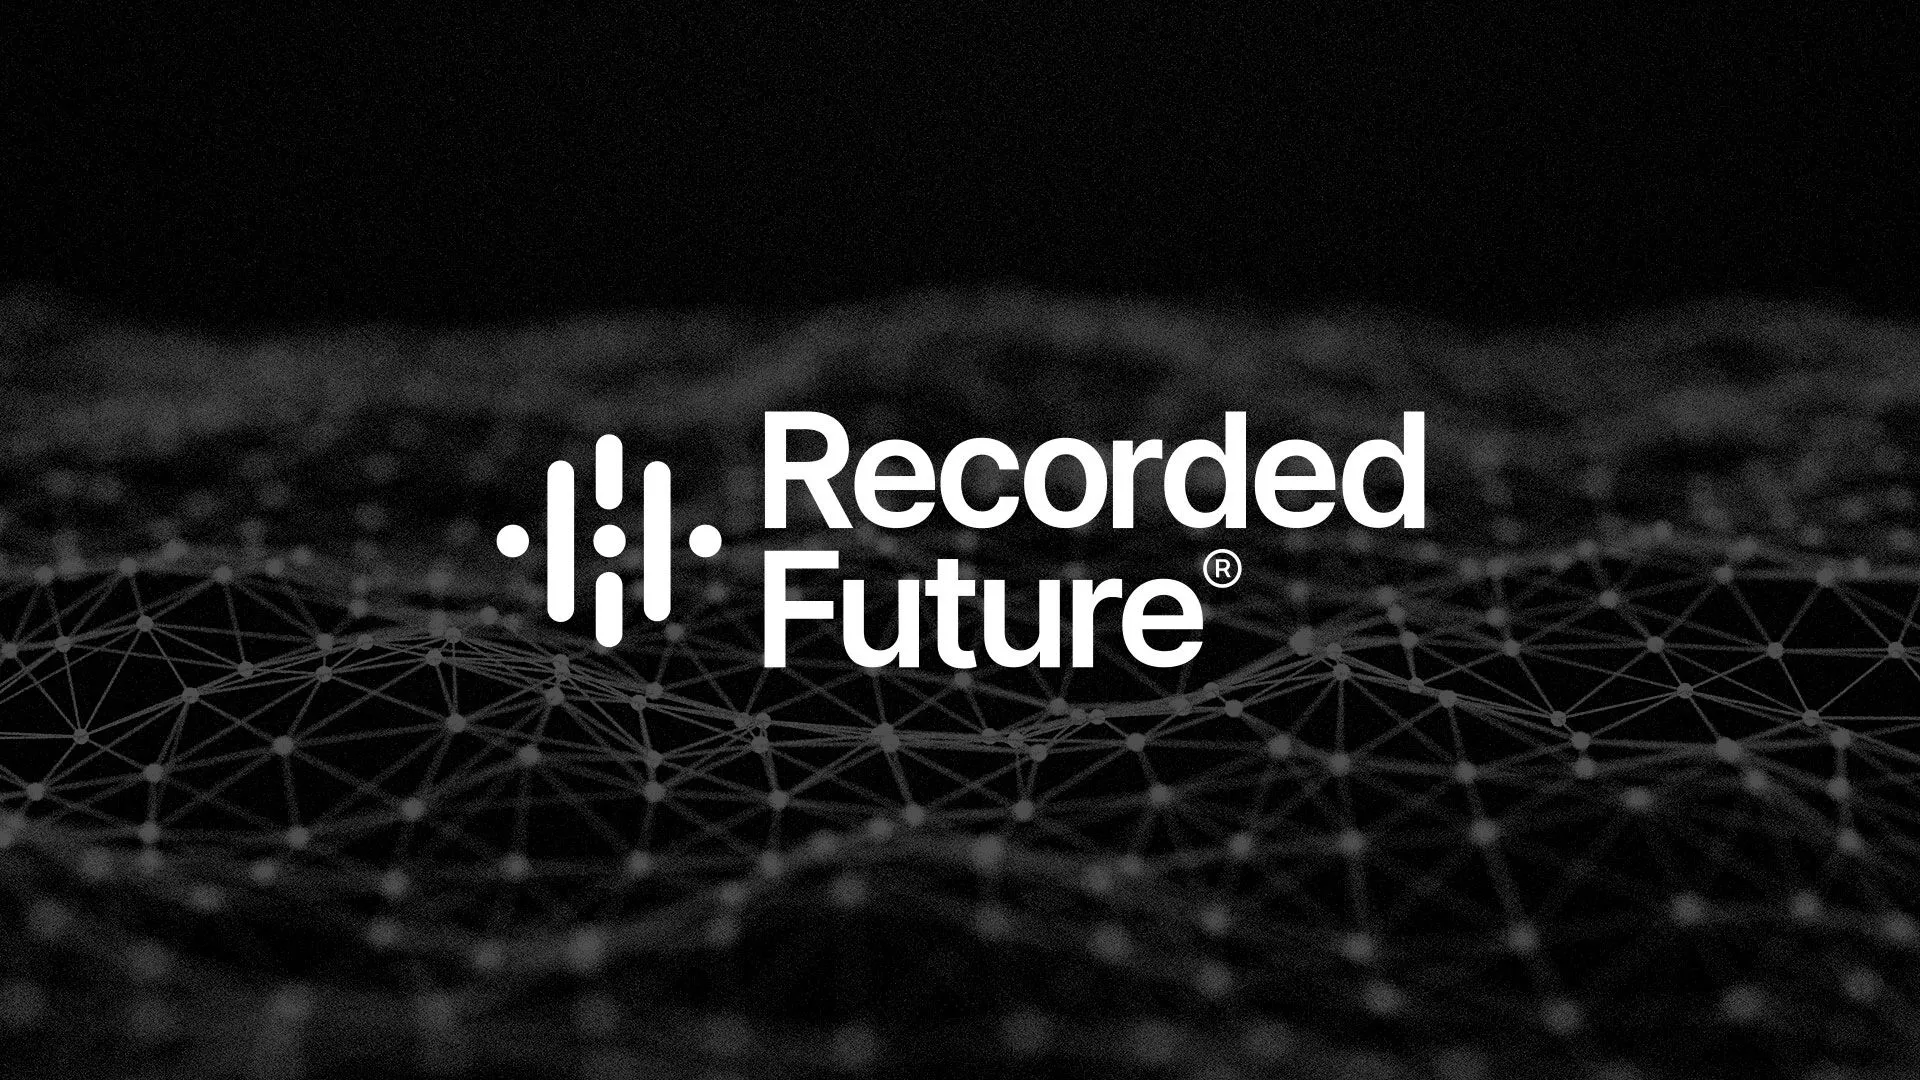 Recorded Future Announces Participation in Upcoming Investor Conferences